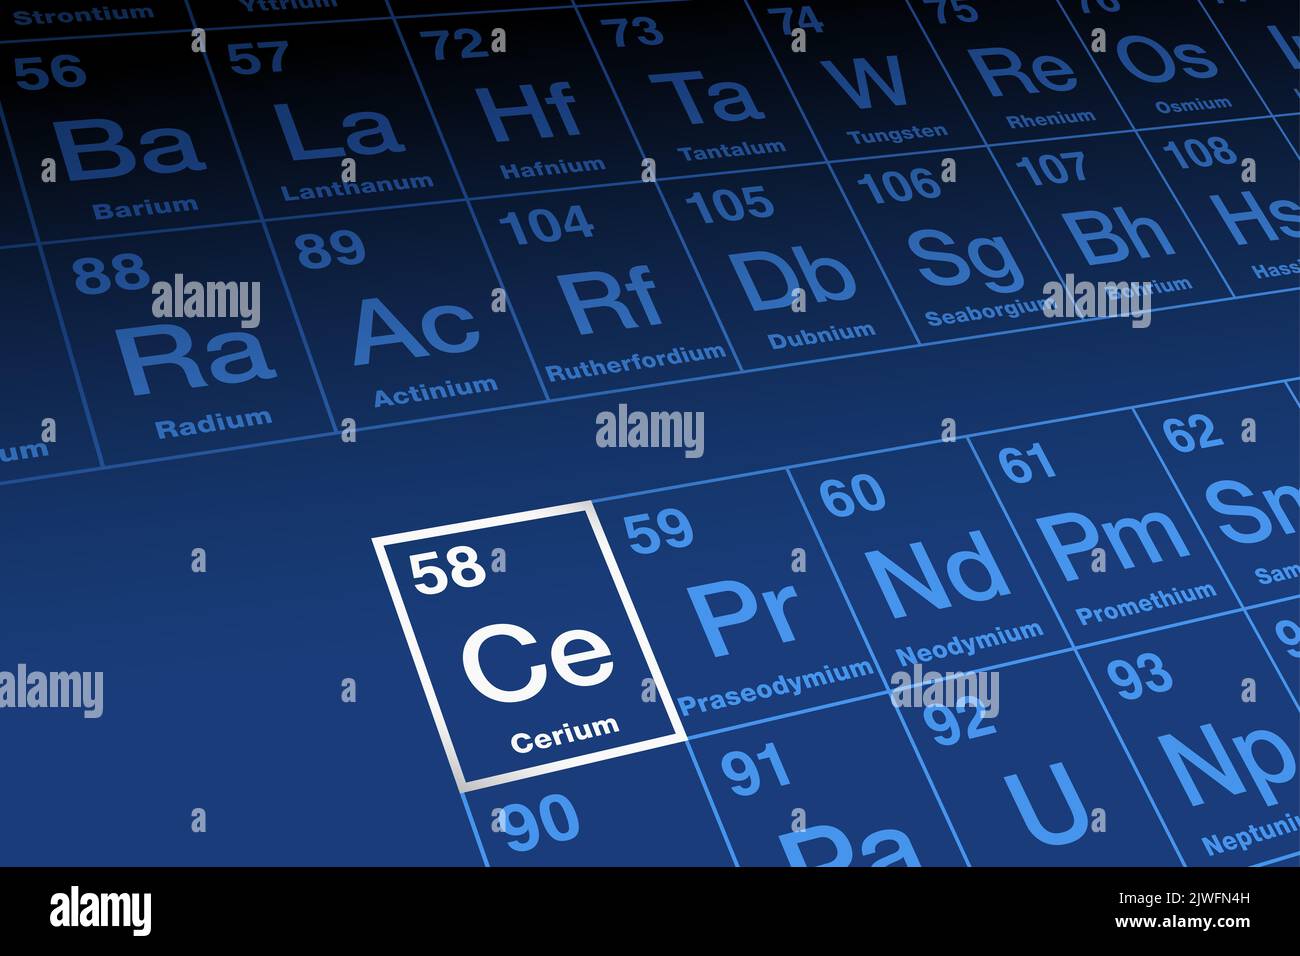 Cerium, on periodic table, in the lanthanide series. Rare earth element, metal with atomic number 58, and symbol Ce, named after asteroid Ceres. Stock Photo